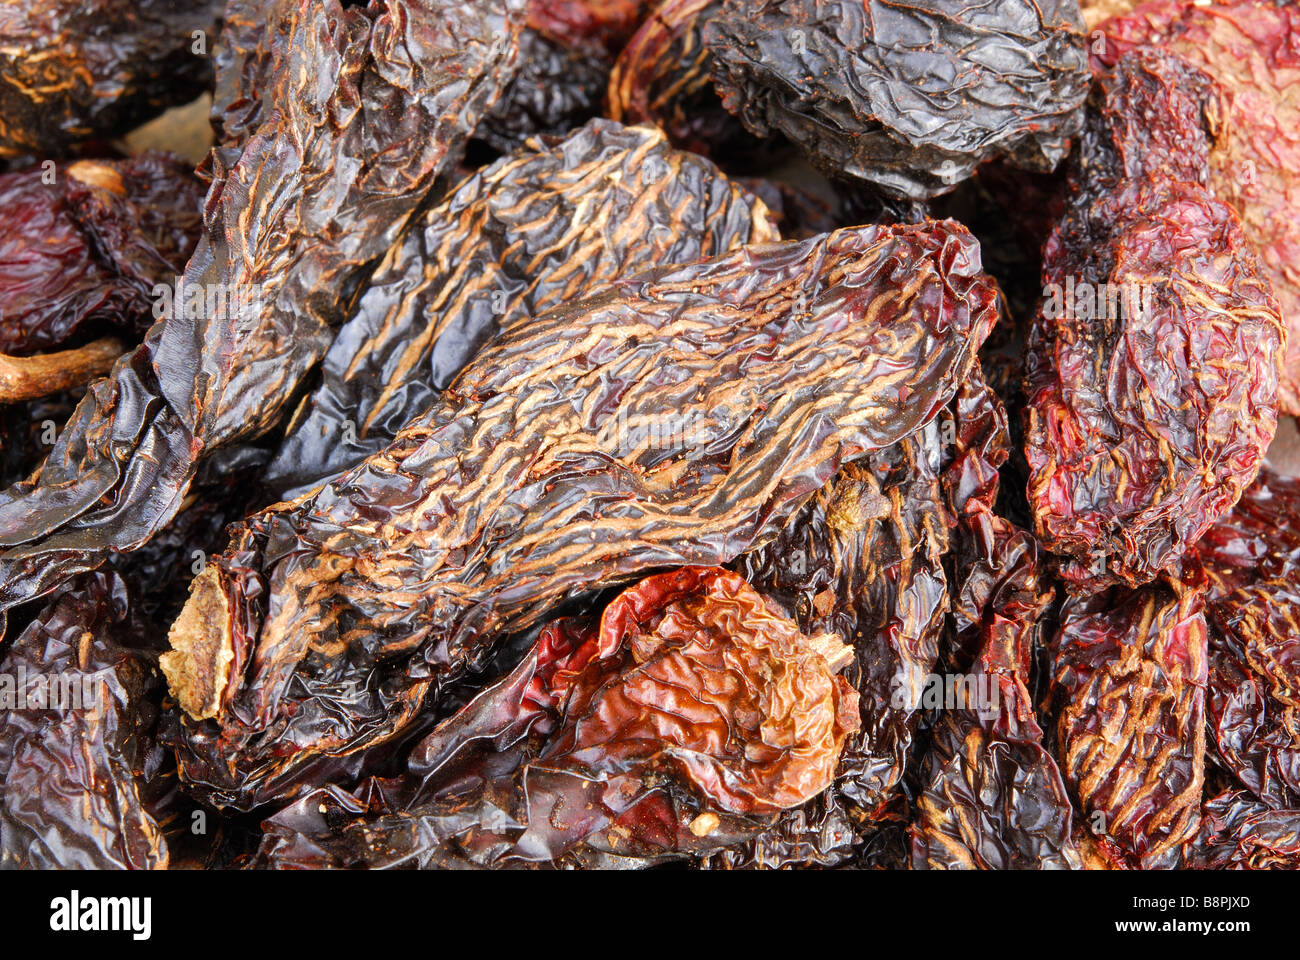 Chipotles. Dried, smoked jalapeno chillies used to add a smoky heat to Mexican and TexMex dishes. Stock Photo